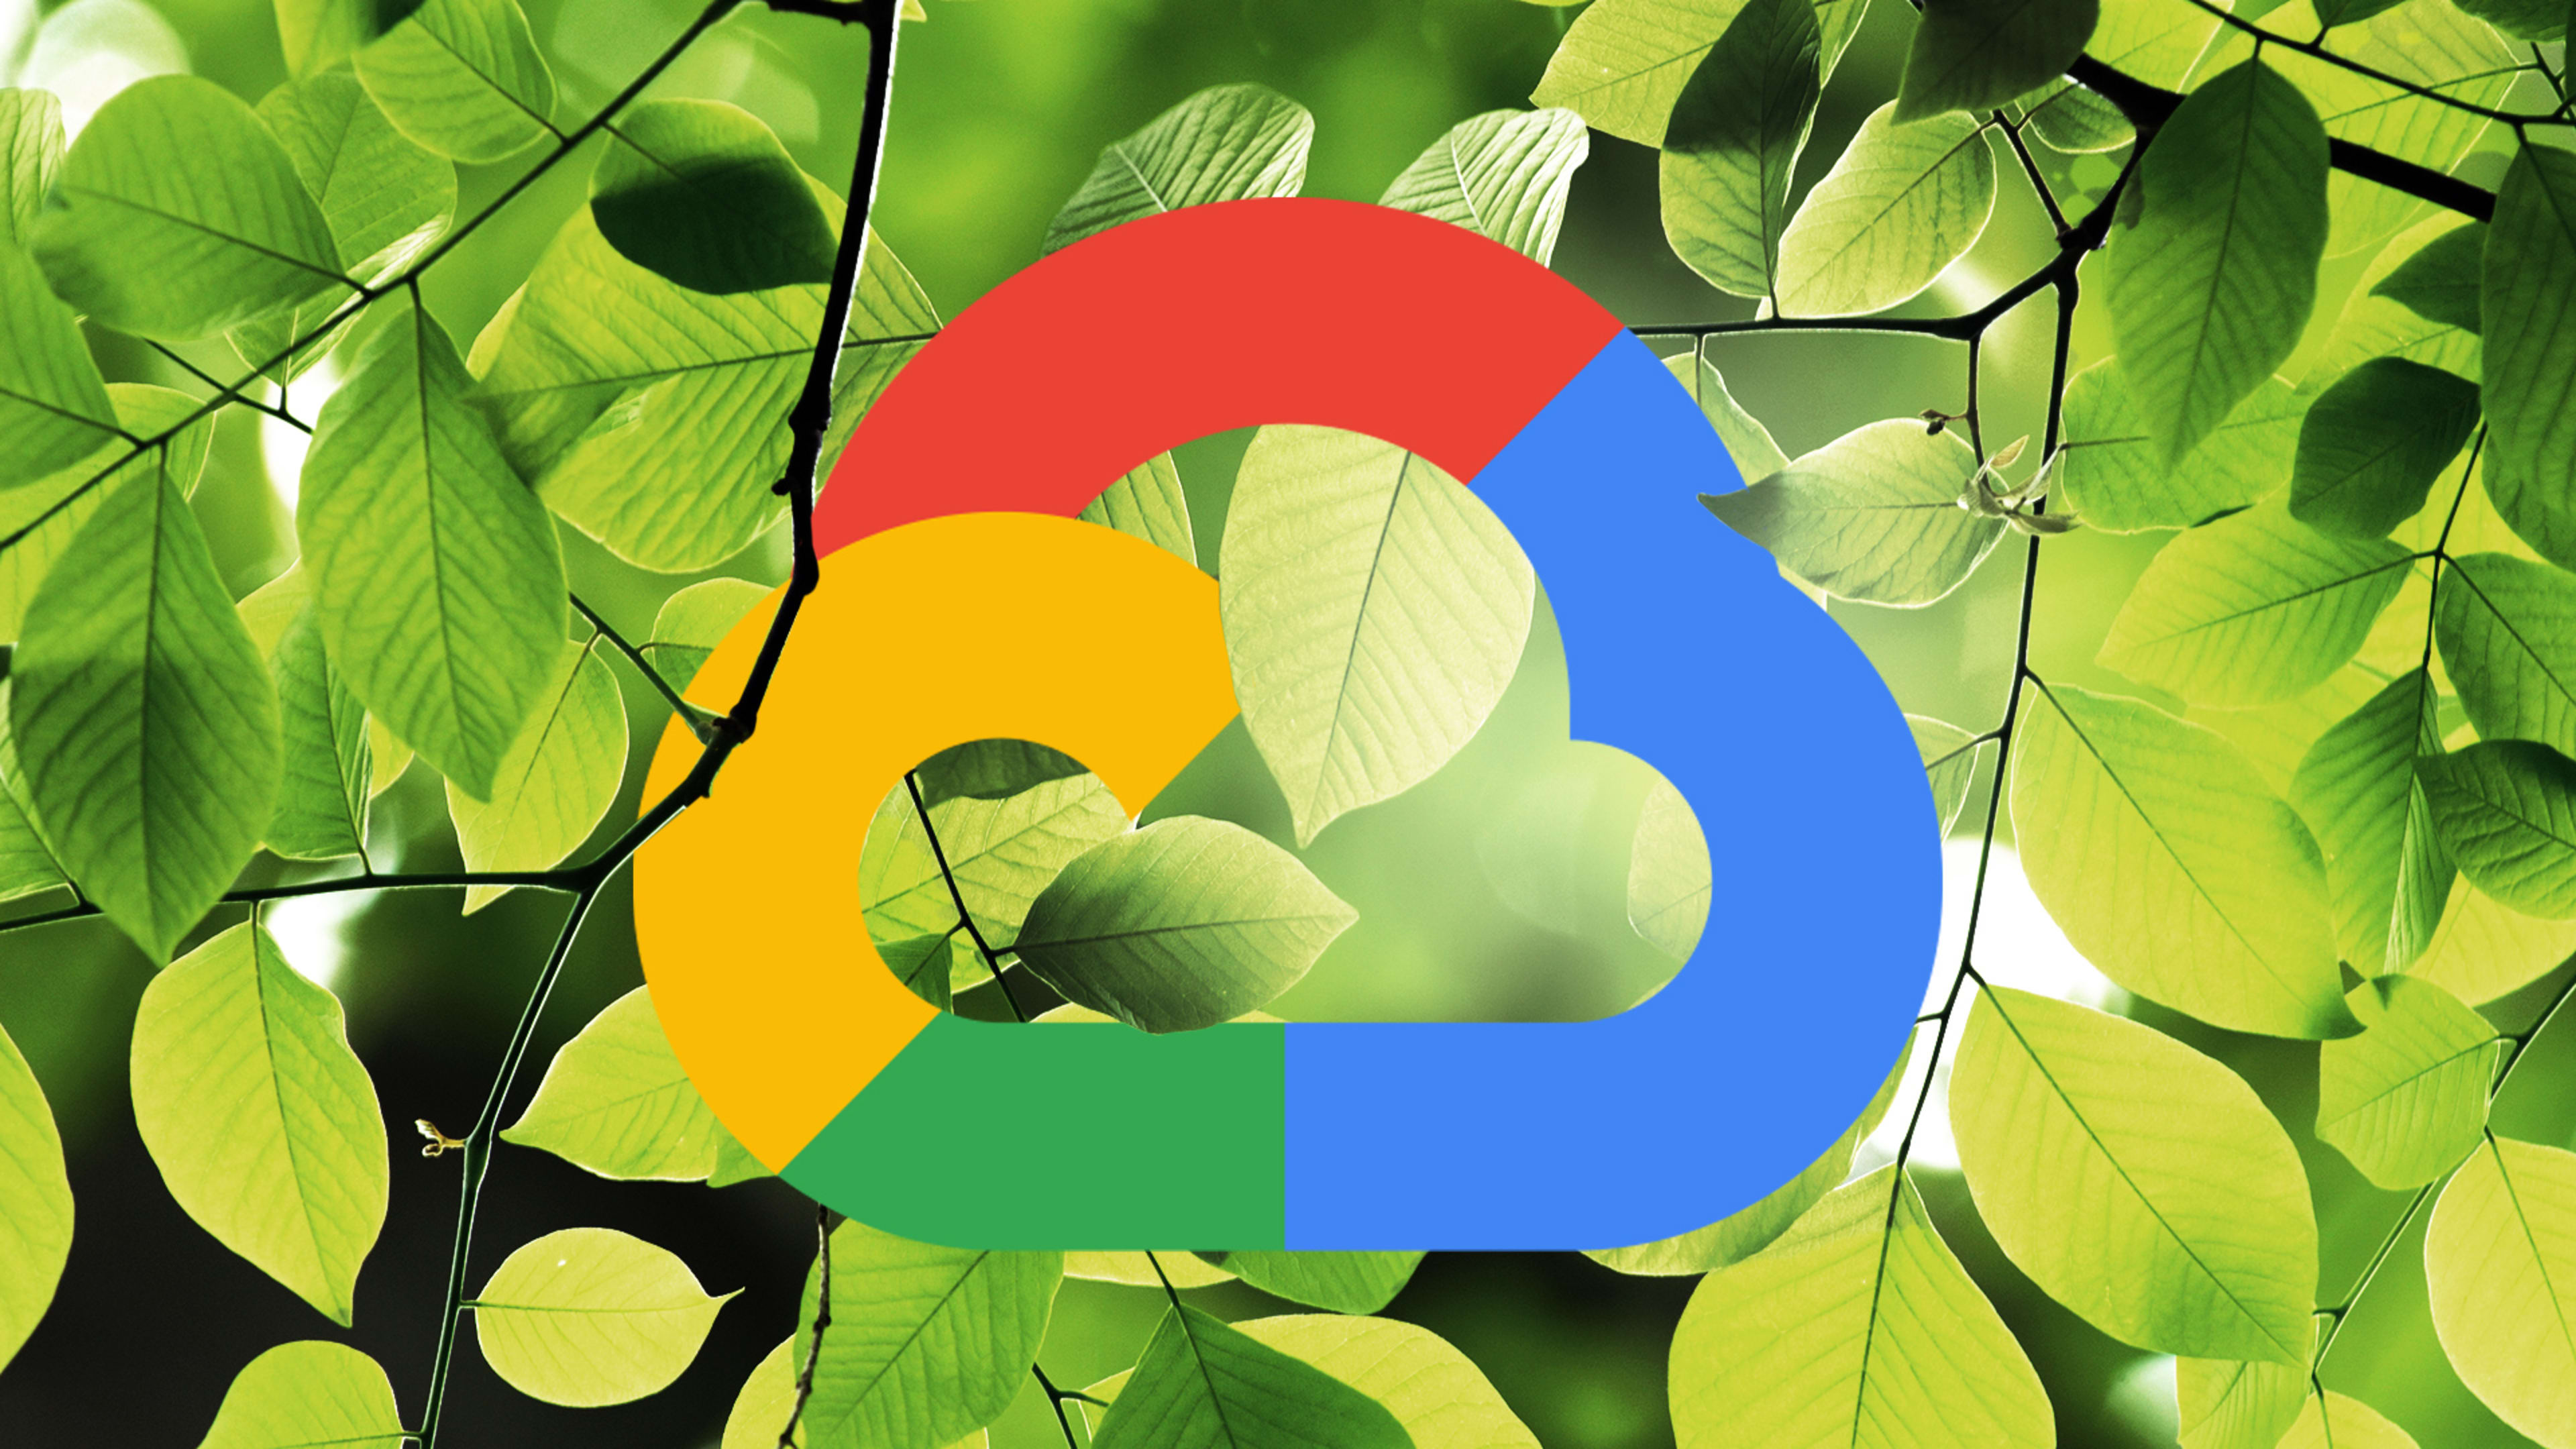 Google has the cleanest cloud. Now it’s helping other companies go green